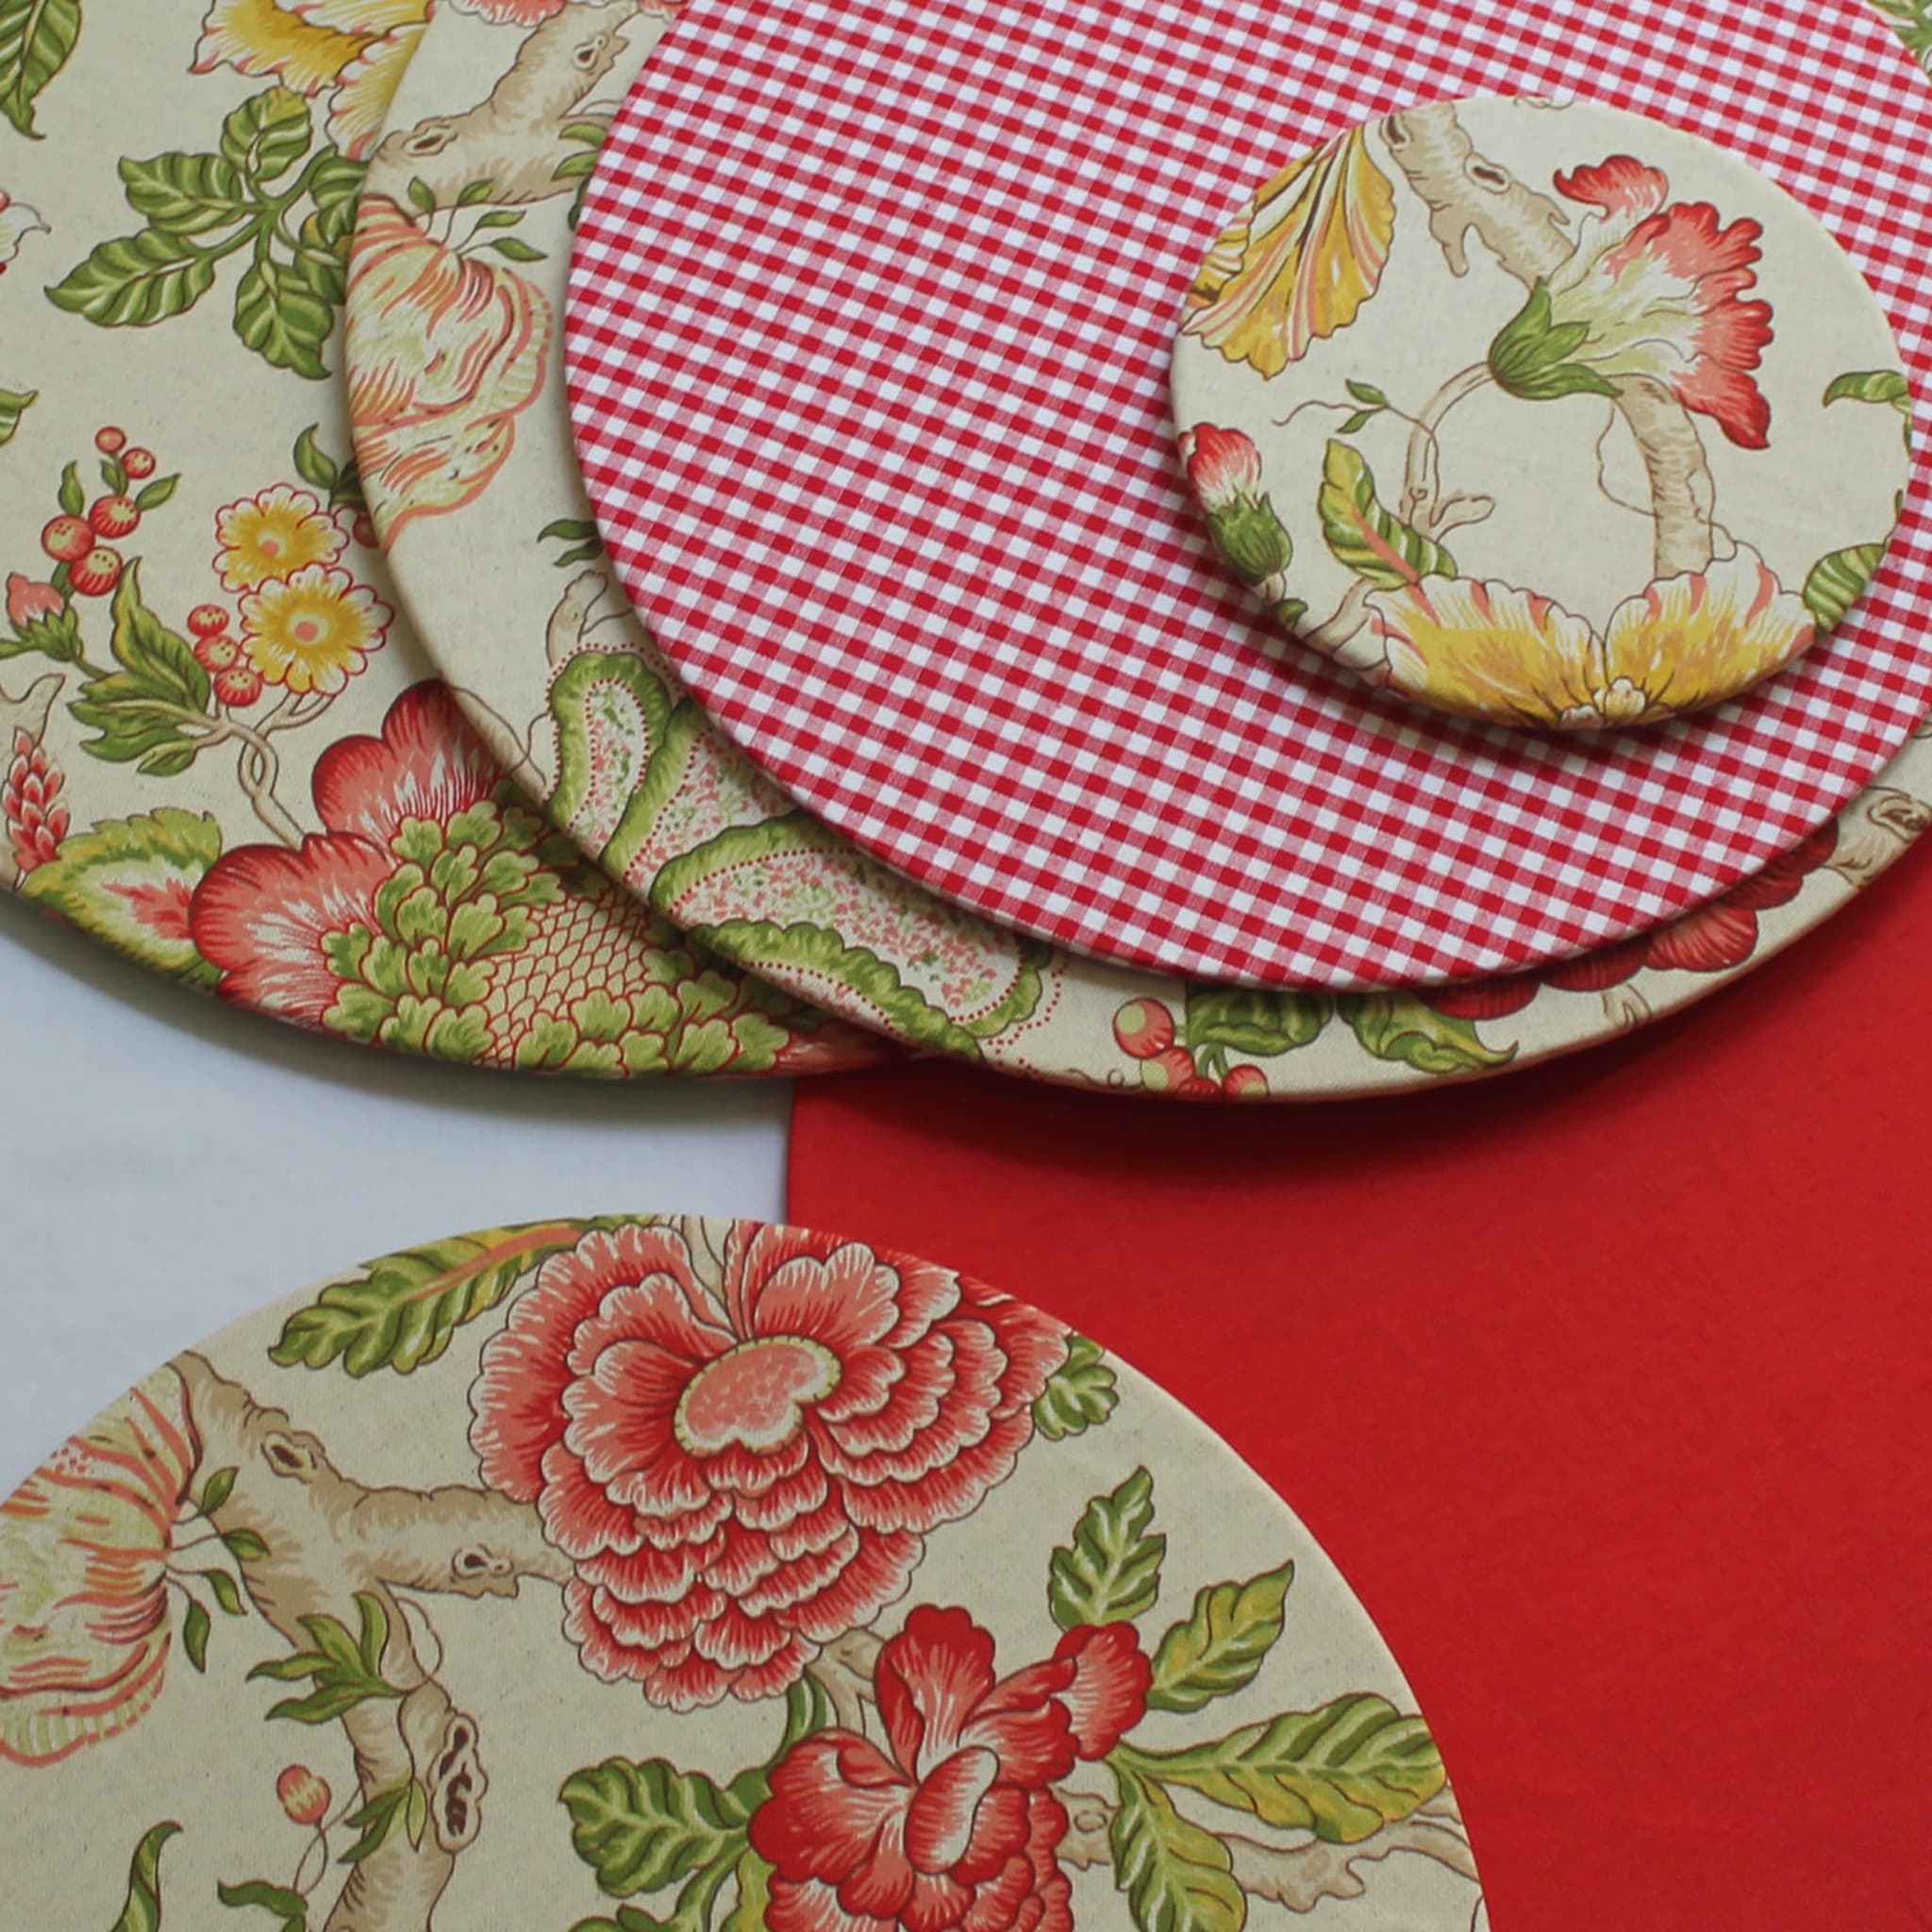 Set of 2 Cuffiette Extra-Small Round Floral Placemats #2 - Alternative view 2